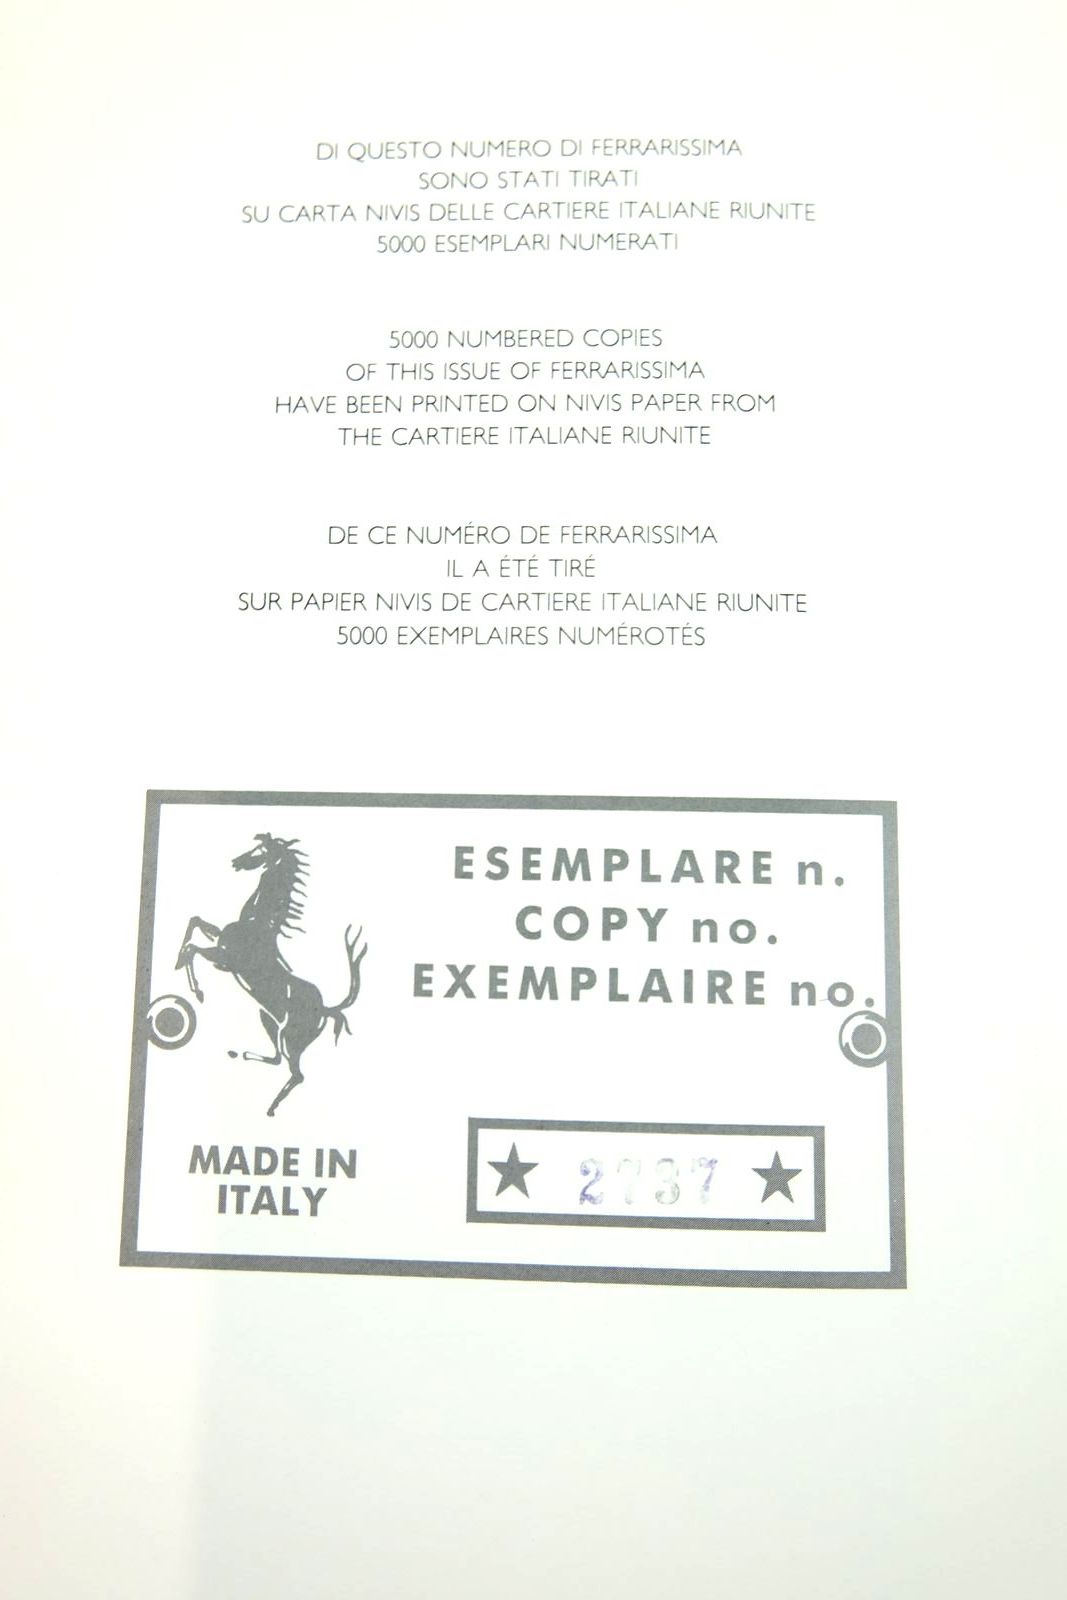 Photo of FERRARISSIMA 2 written by Madaro, Giancenzo published by Automobilia (STOCK CODE: 2139329)  for sale by Stella & Rose's Books